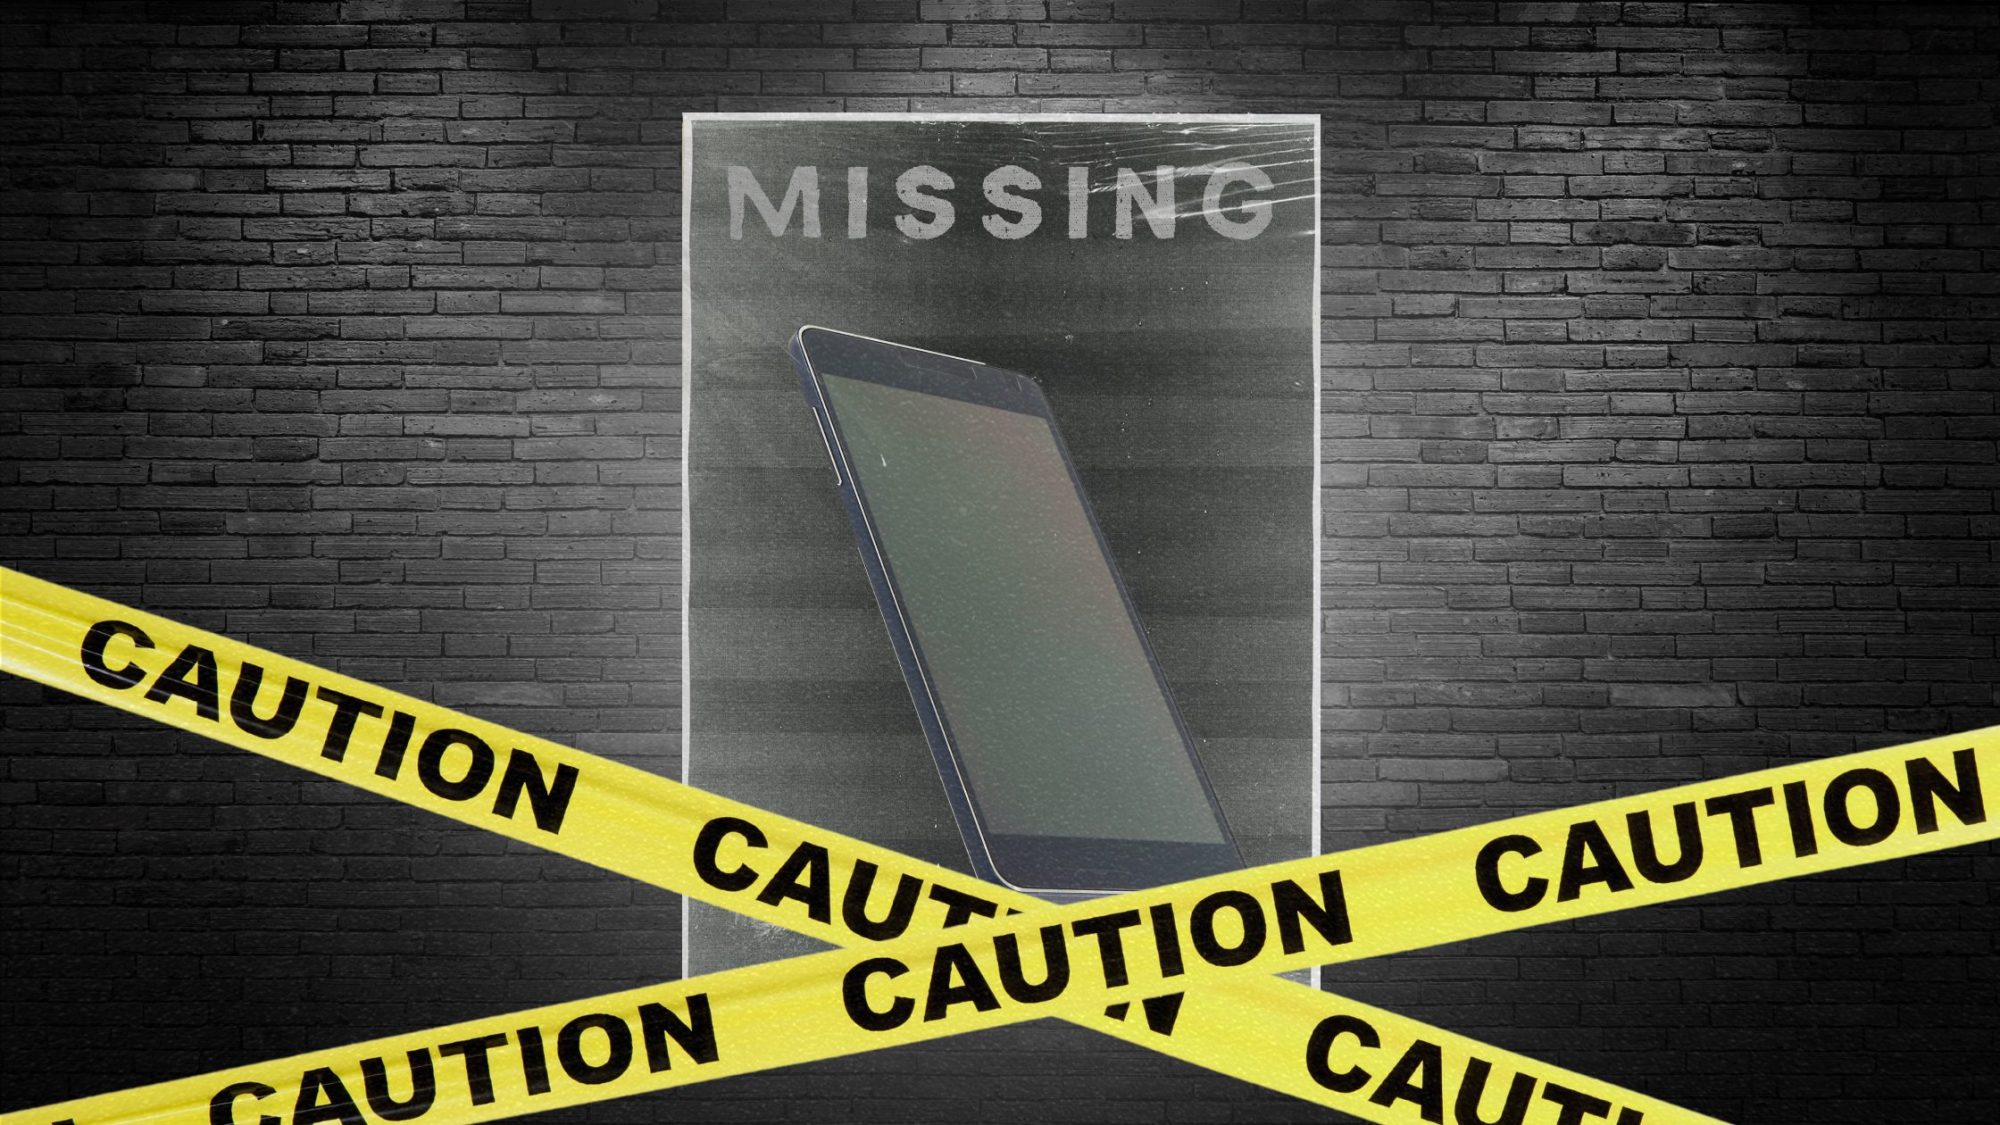 A poster on a dark brick wall shows an image of a missing phone.